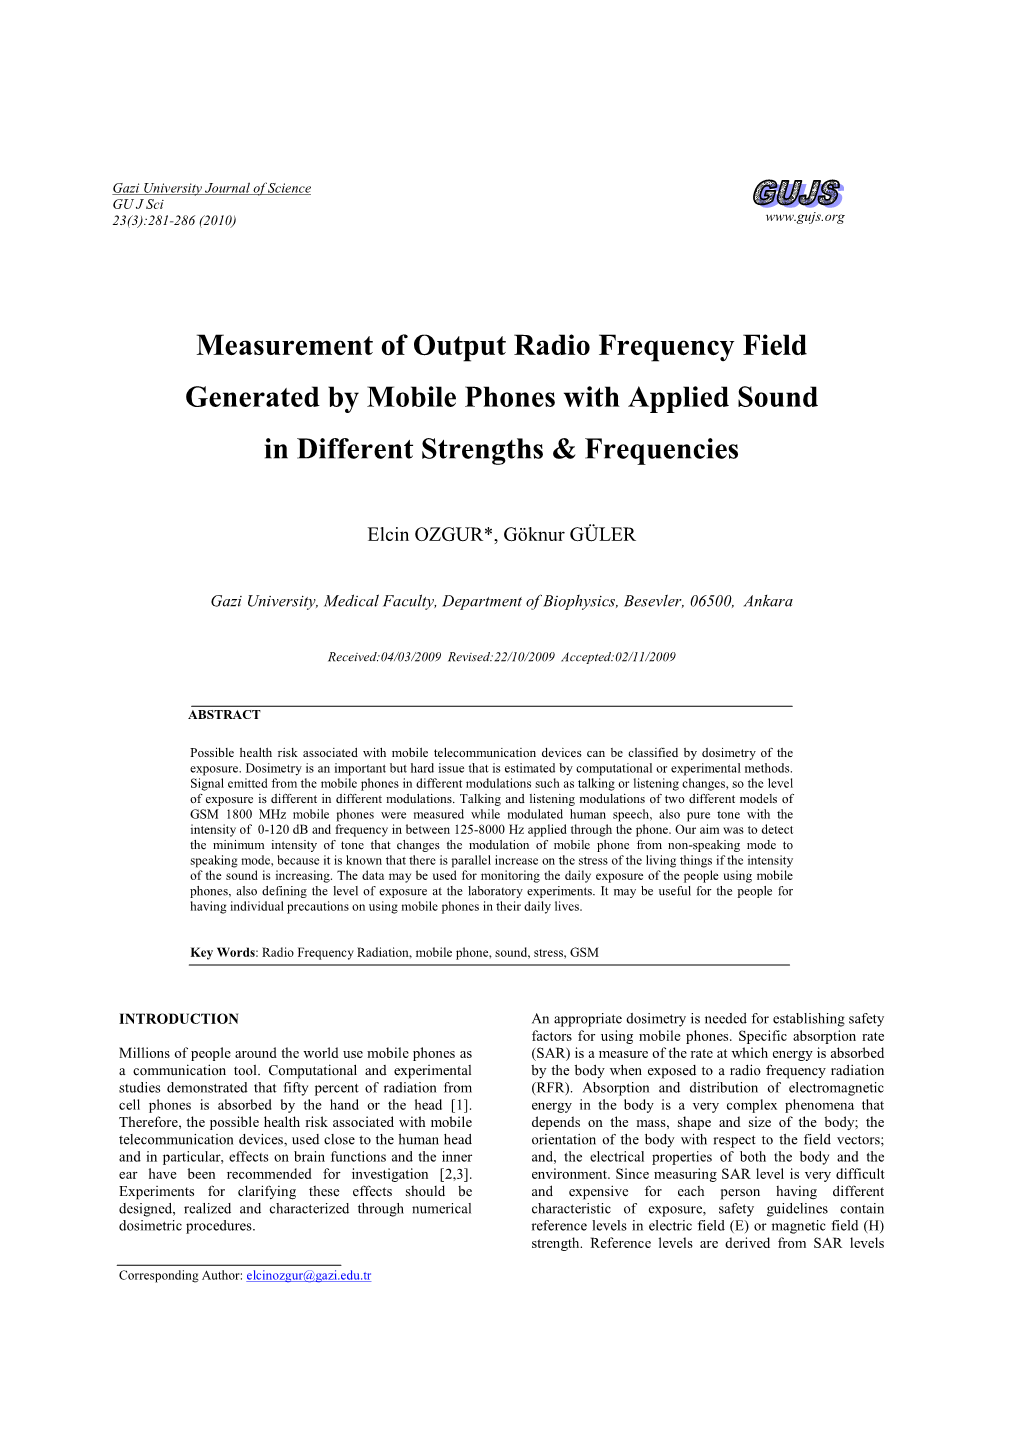 Measurement of Output Radio Frequency Field Generated by Mobile Phones with Applied Sound in Different Strengths & Frequencies